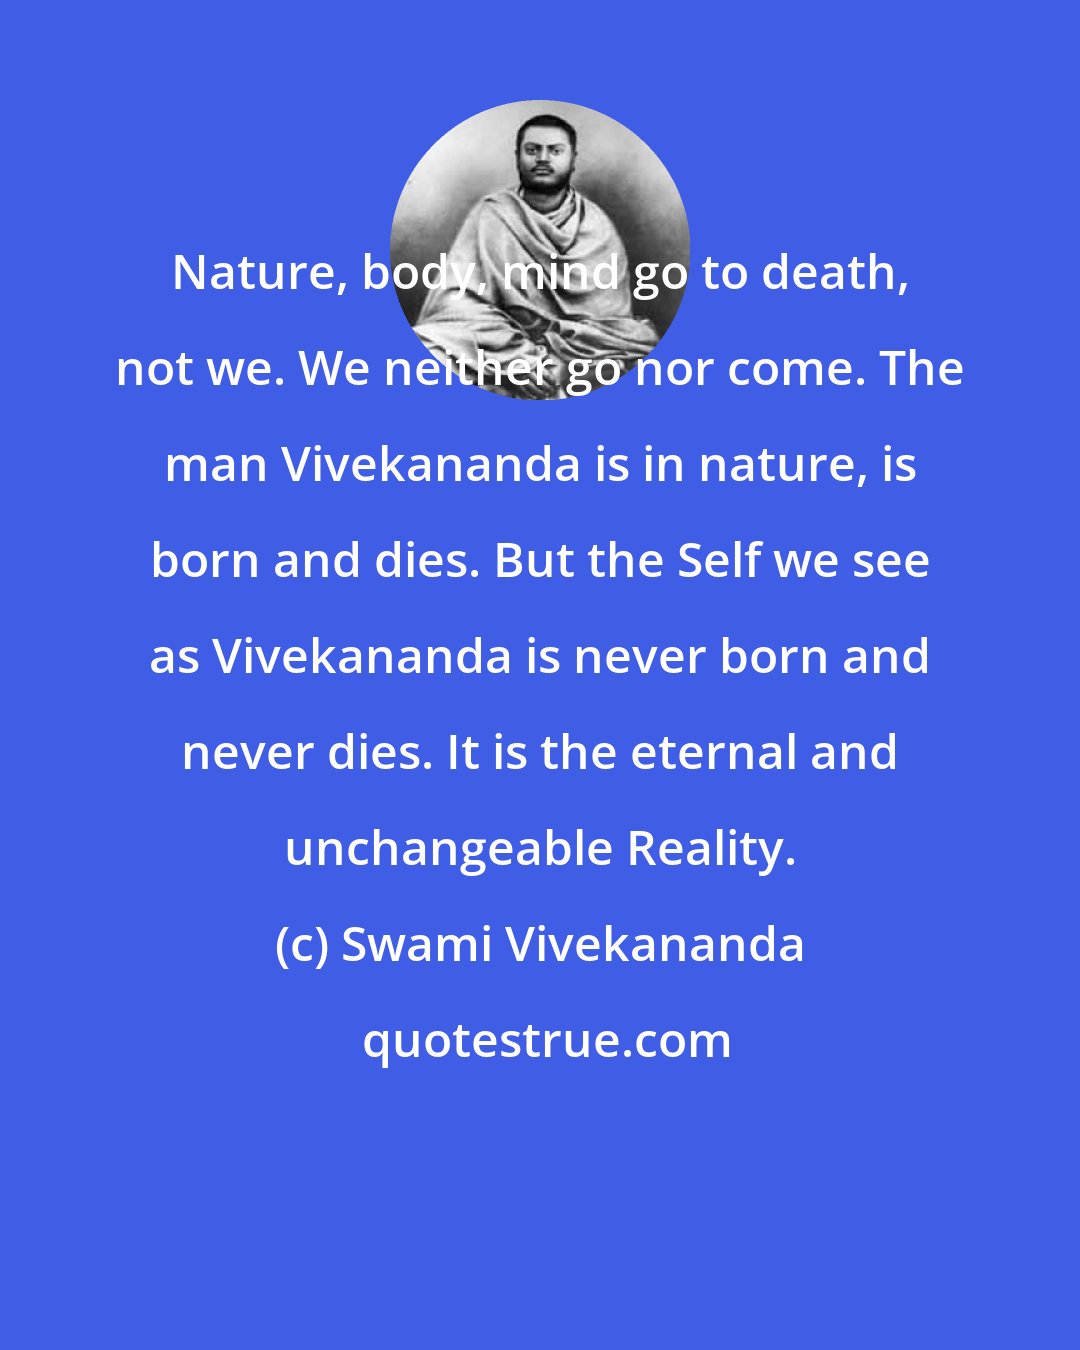 Swami Vivekananda: Nature, body, mind go to death, not we. We neither go nor come. The man Vivekananda is in nature, is born and dies. But the Self we see as Vivekananda is never born and never dies. It is the eternal and unchangeable Reality.